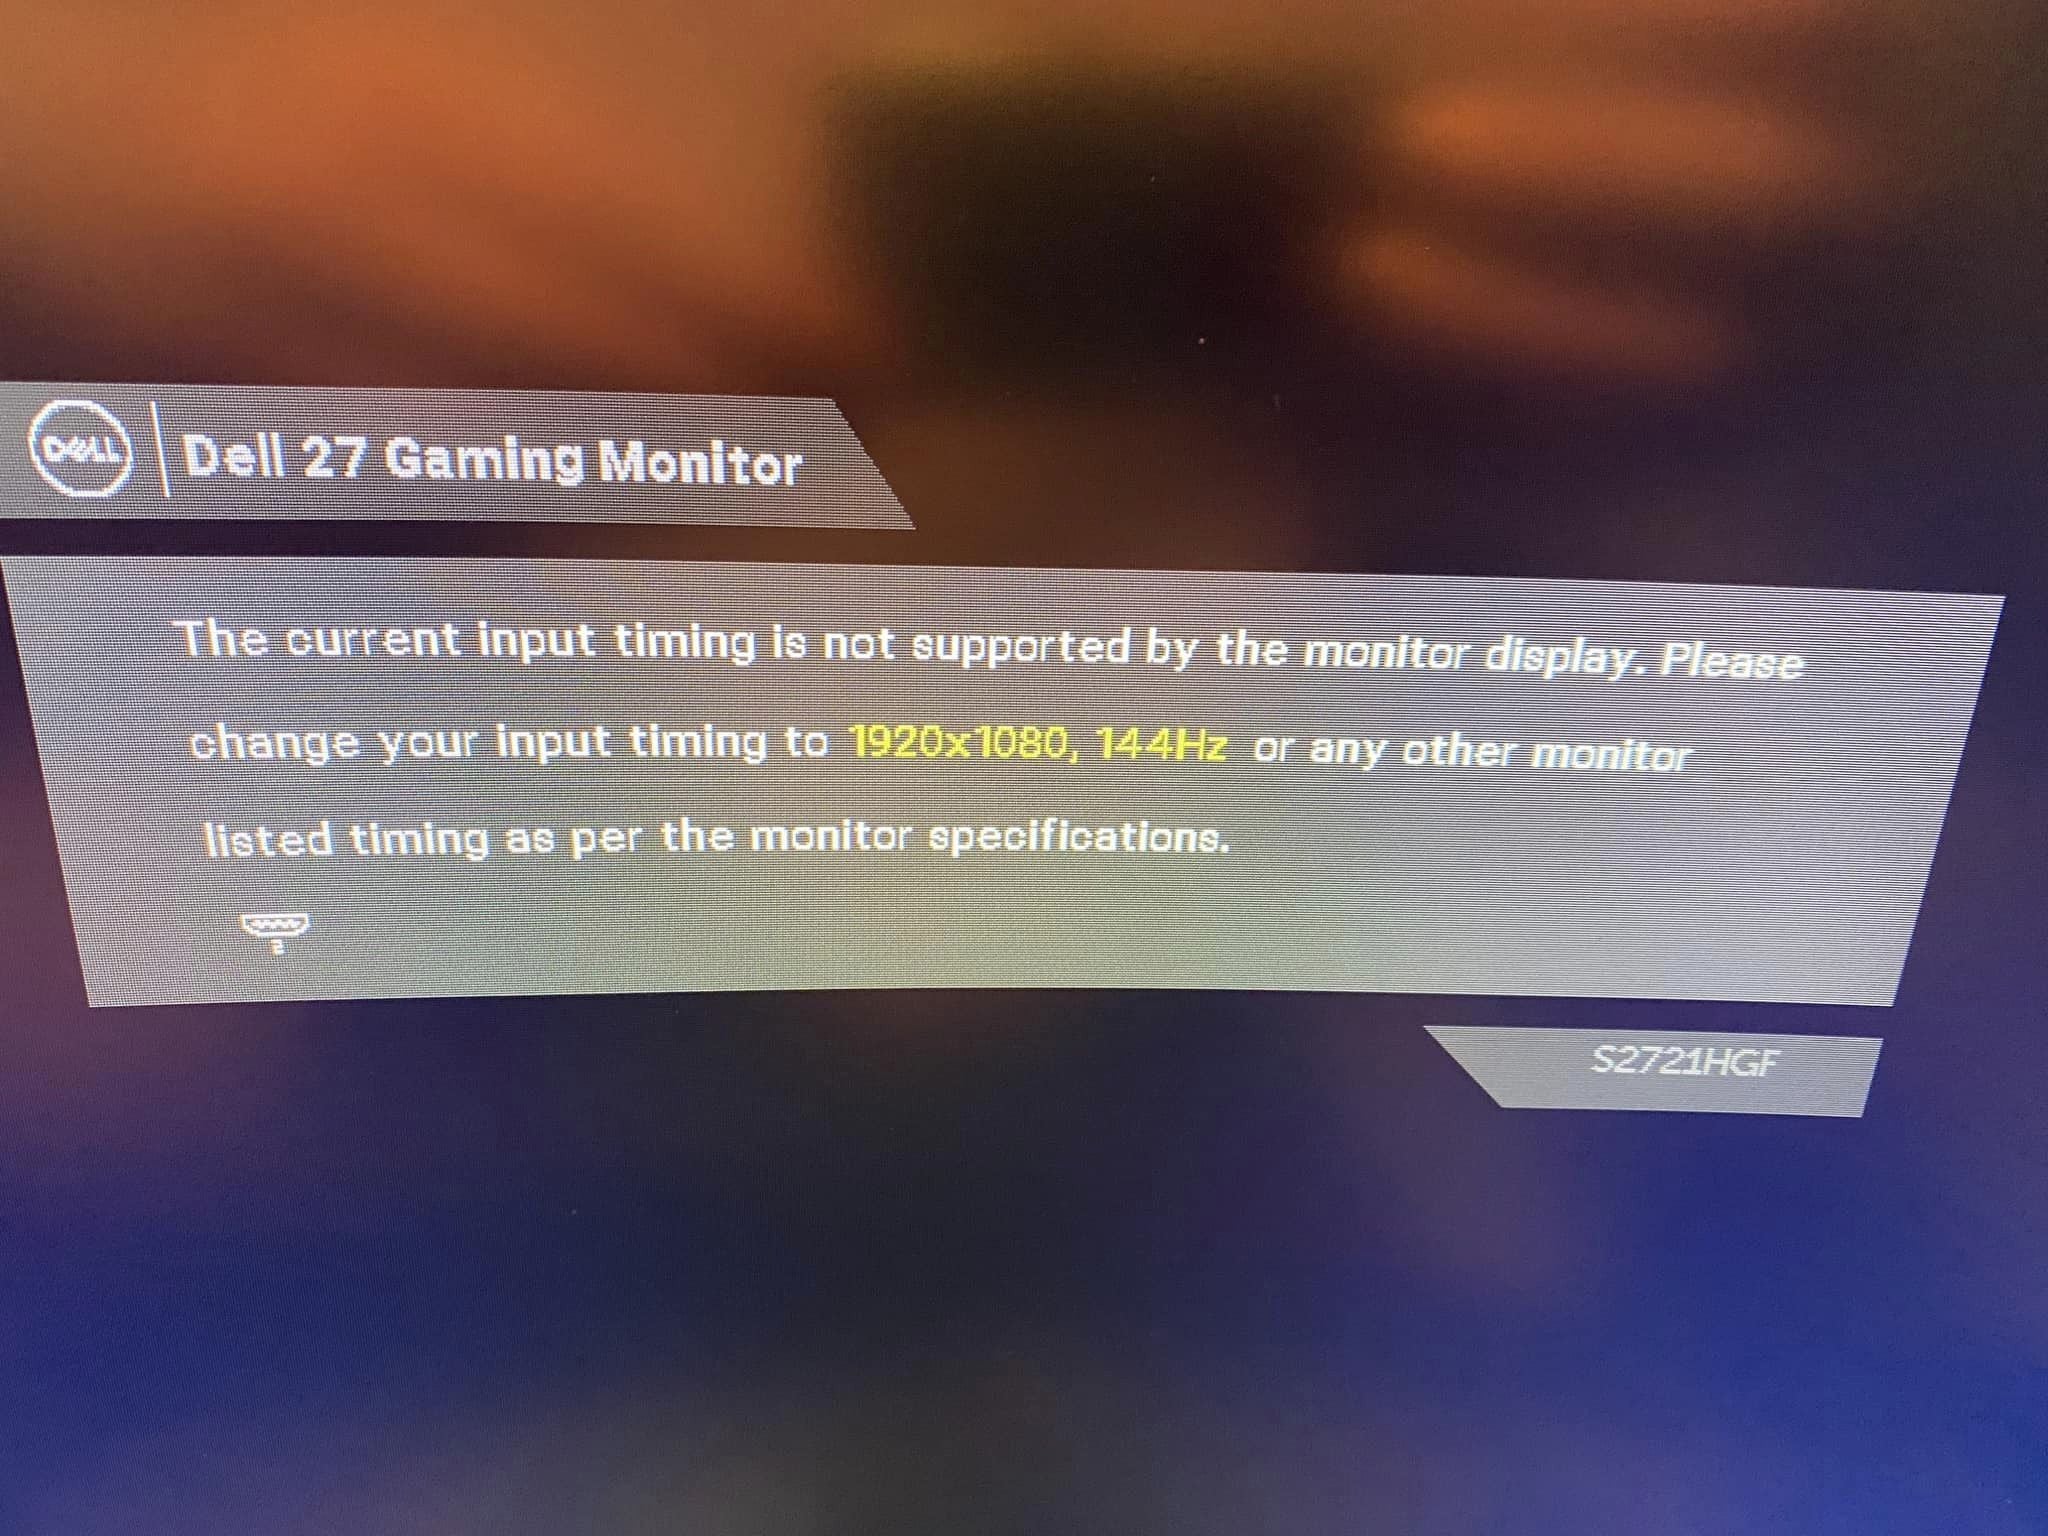 The Current Input Timing is Not Supported by the Monitor Display Ubuntu